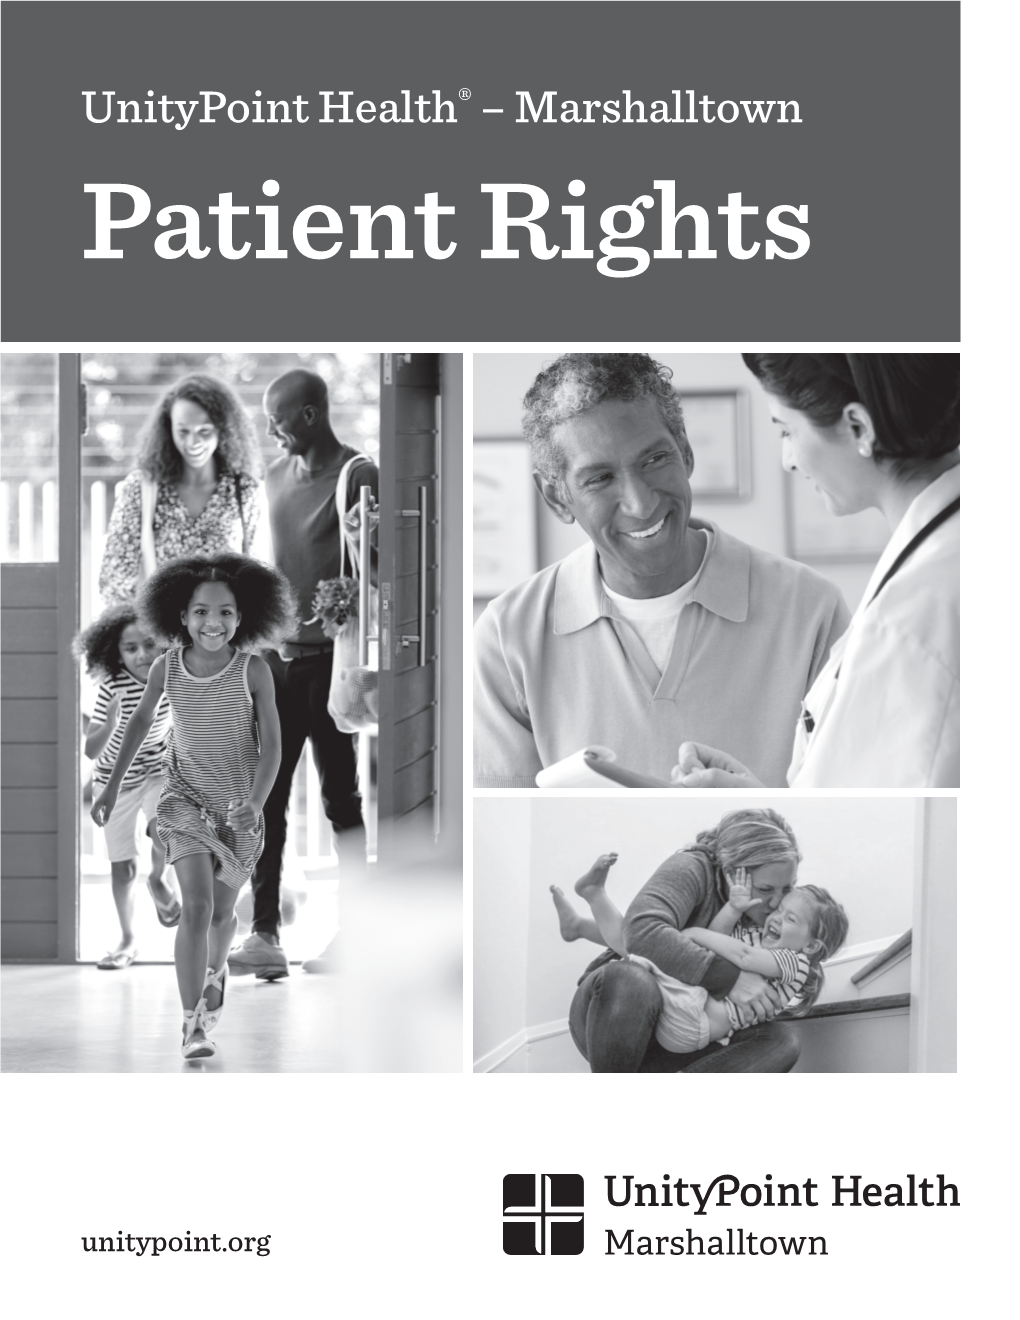 Unitypoint Health® – Marshalltown Patient Rights